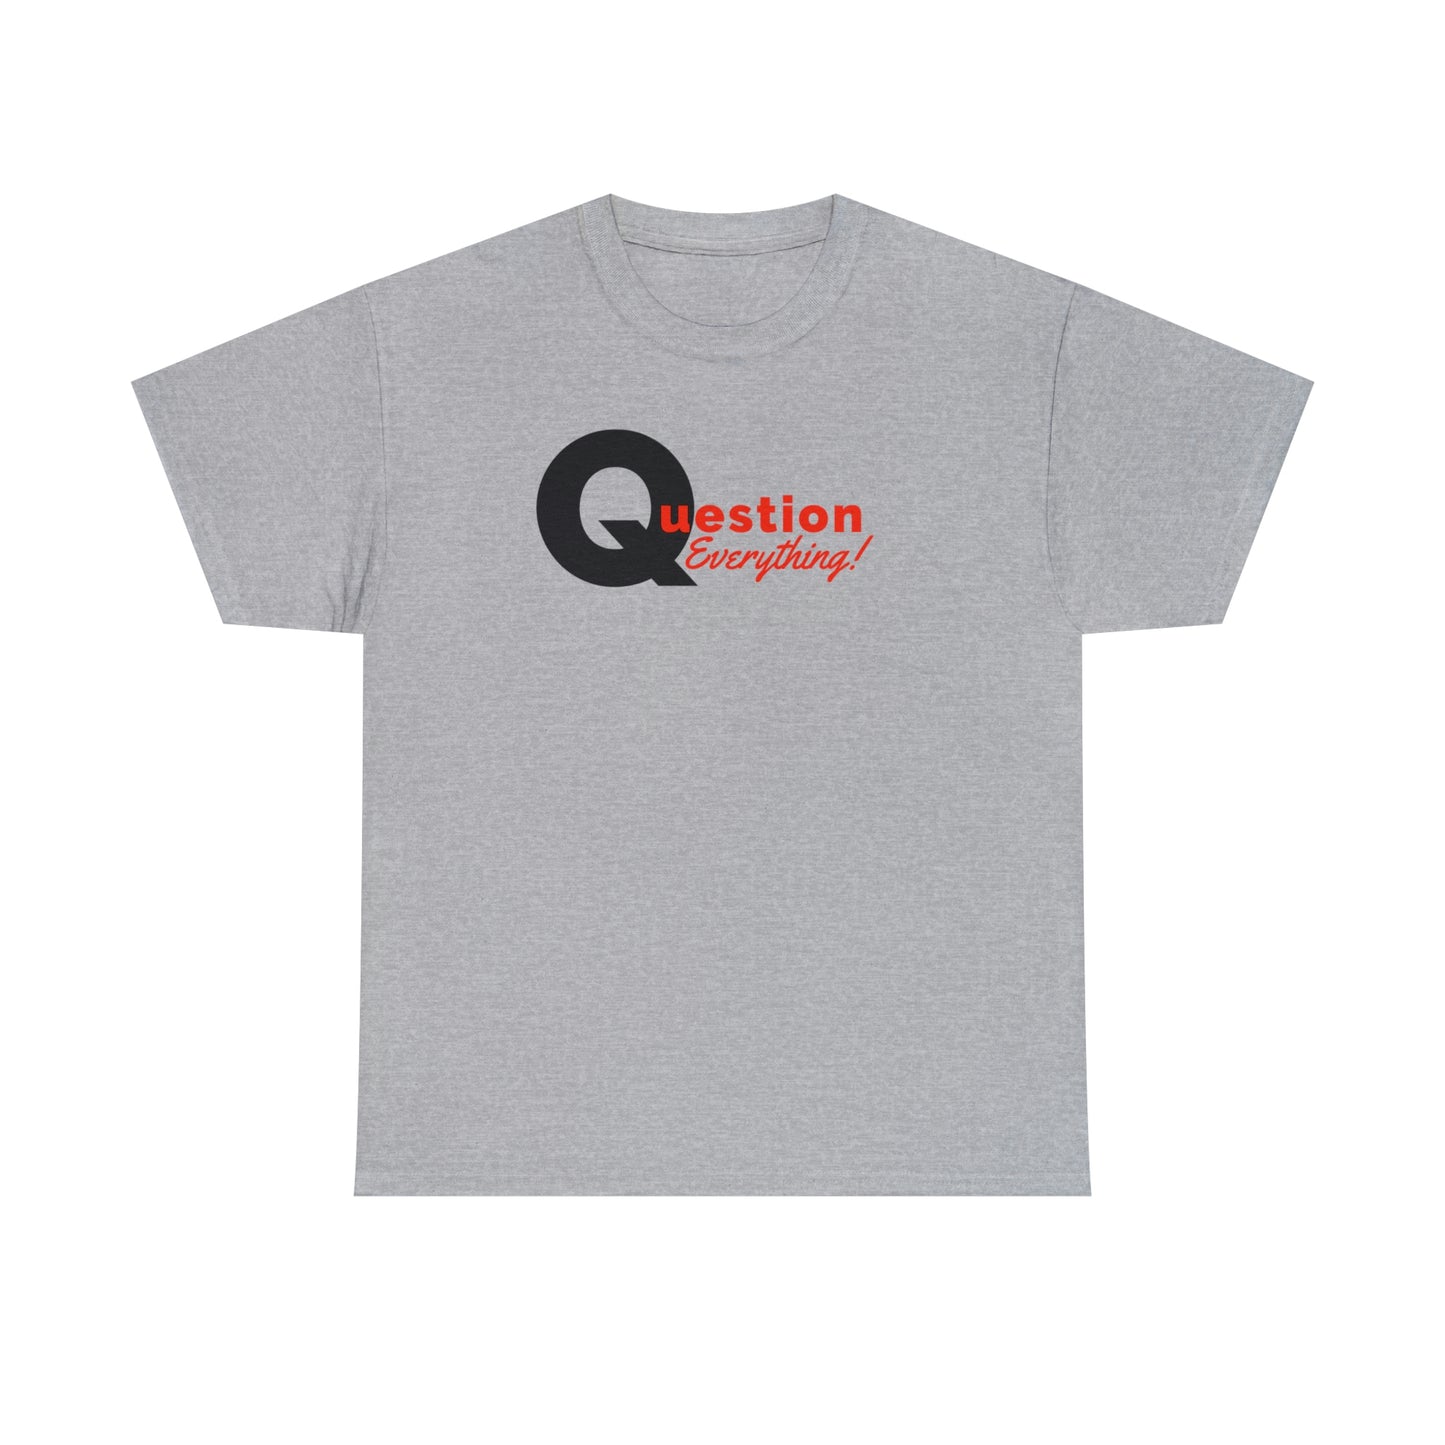 Question Everything T-Shirt For Q Patriot T Shirt For Conservative T Shirt For Patriot Shirt For Conspiracy T Shirt For MAGA Gift Idea